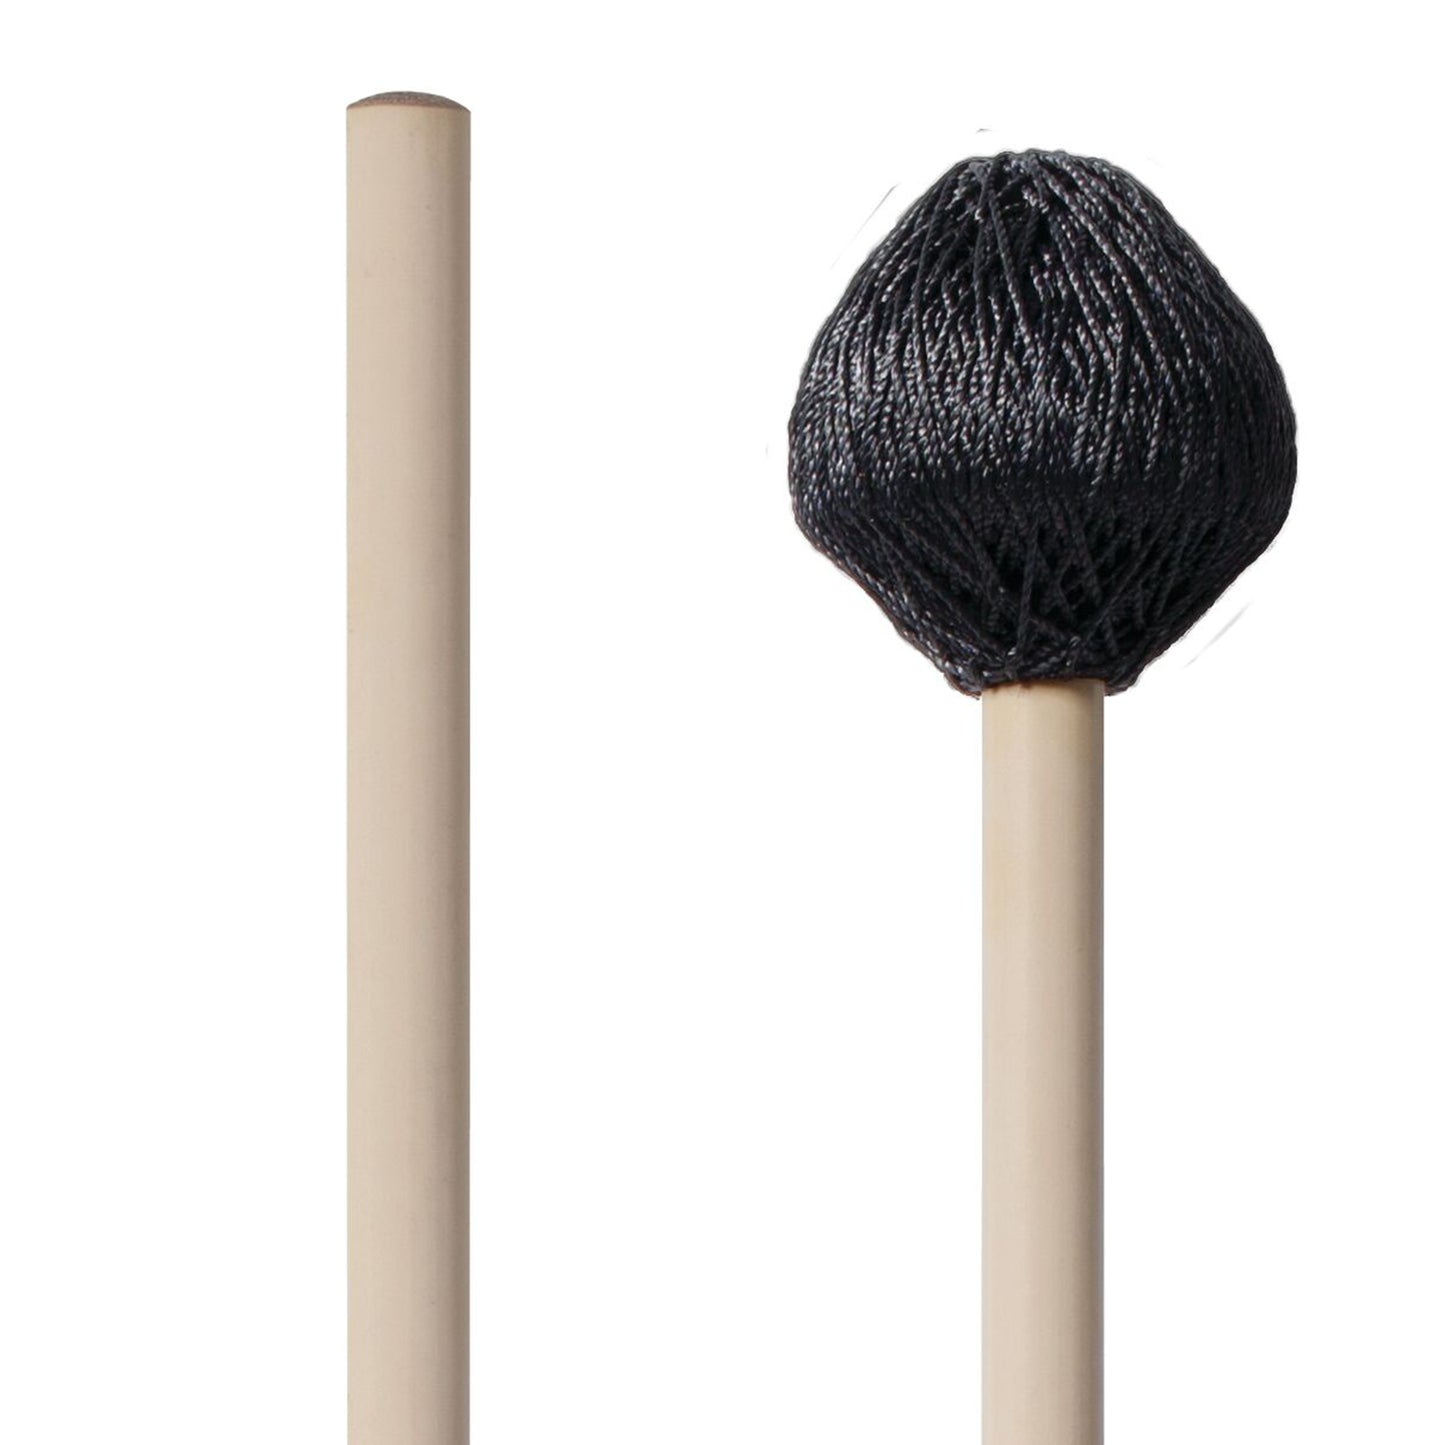 M189 - Corpsmaster Multi-Application Series - Very Hard, Weighted Rubber Core Mallets